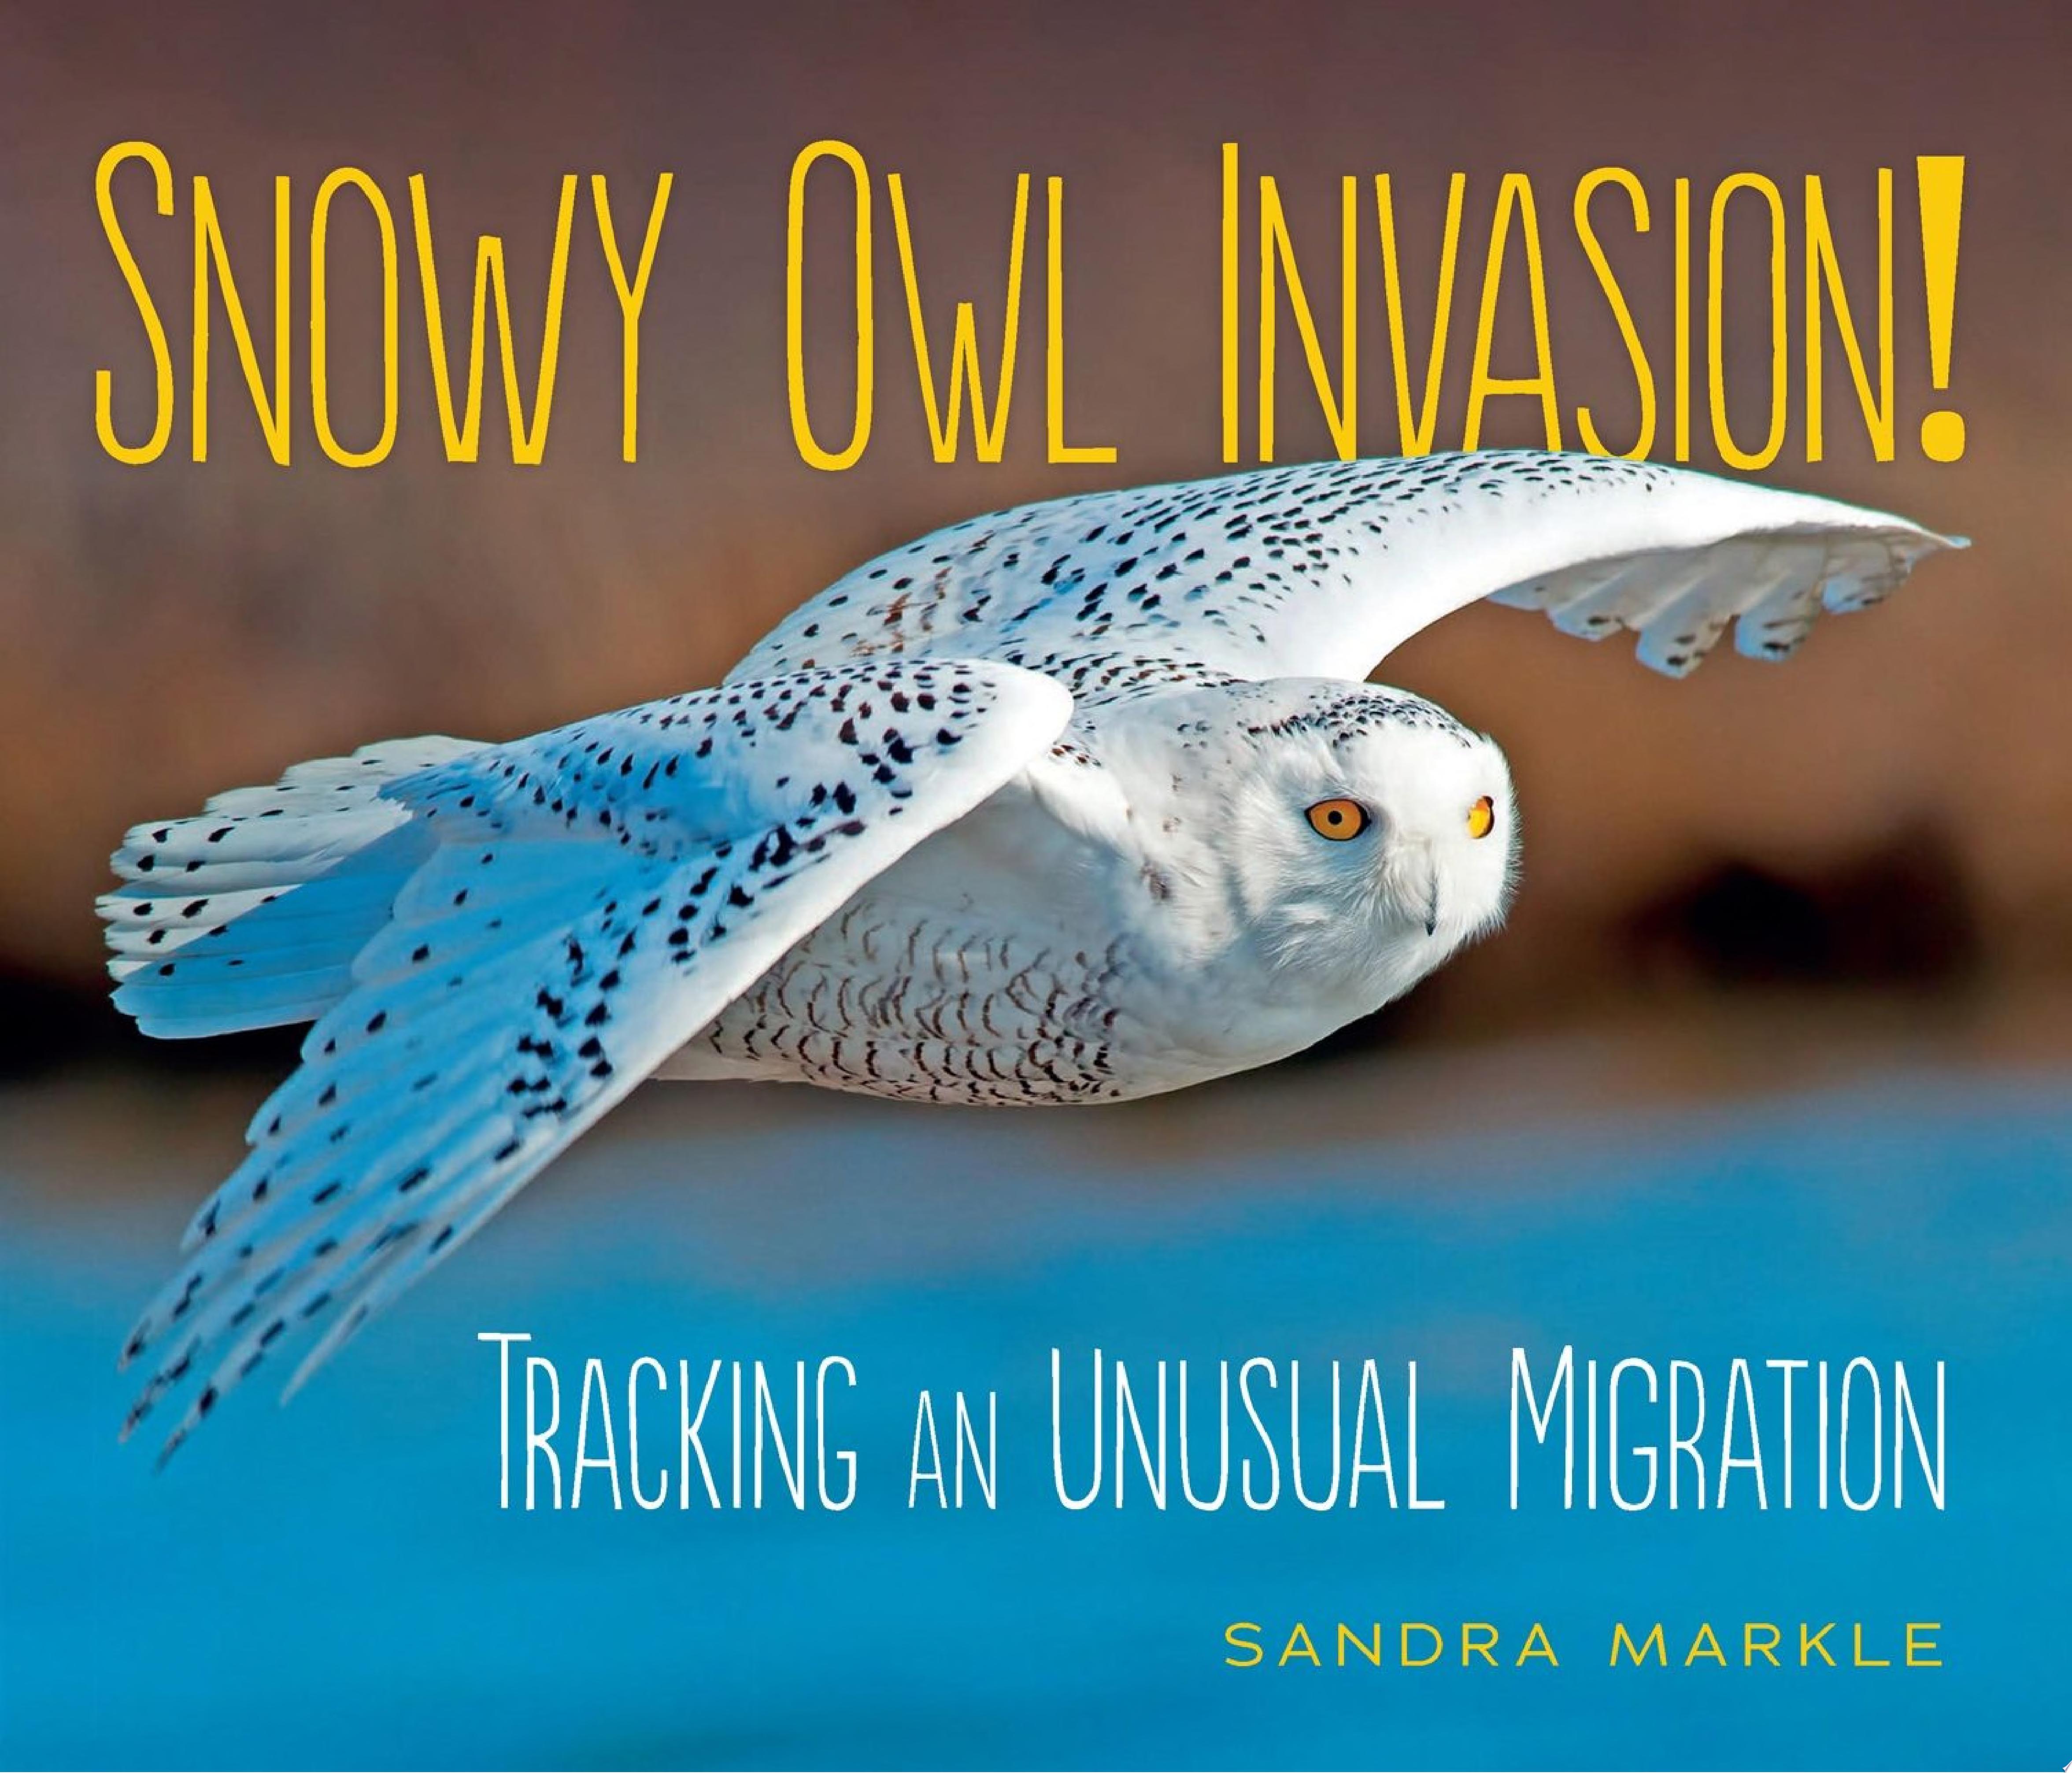 Image for "Snowy Owl Invasion!"